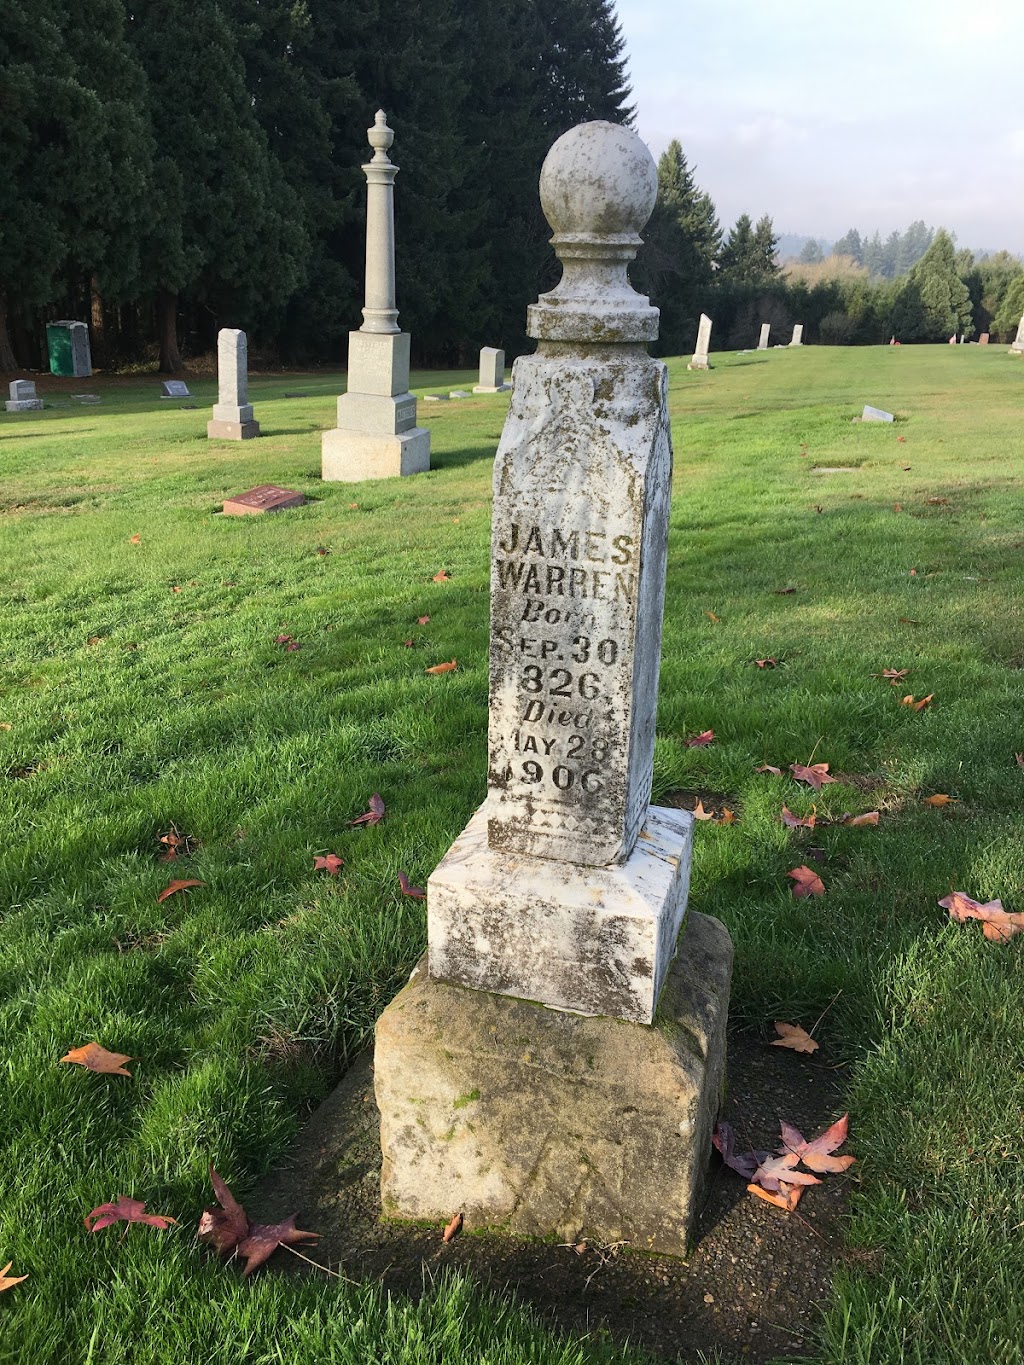 Mount Olive Cemetery Association Of Laurel Oregon | 15445 SW Campbell Rd, Hillsboro, OR 97123 | Phone: (503) 628-2402